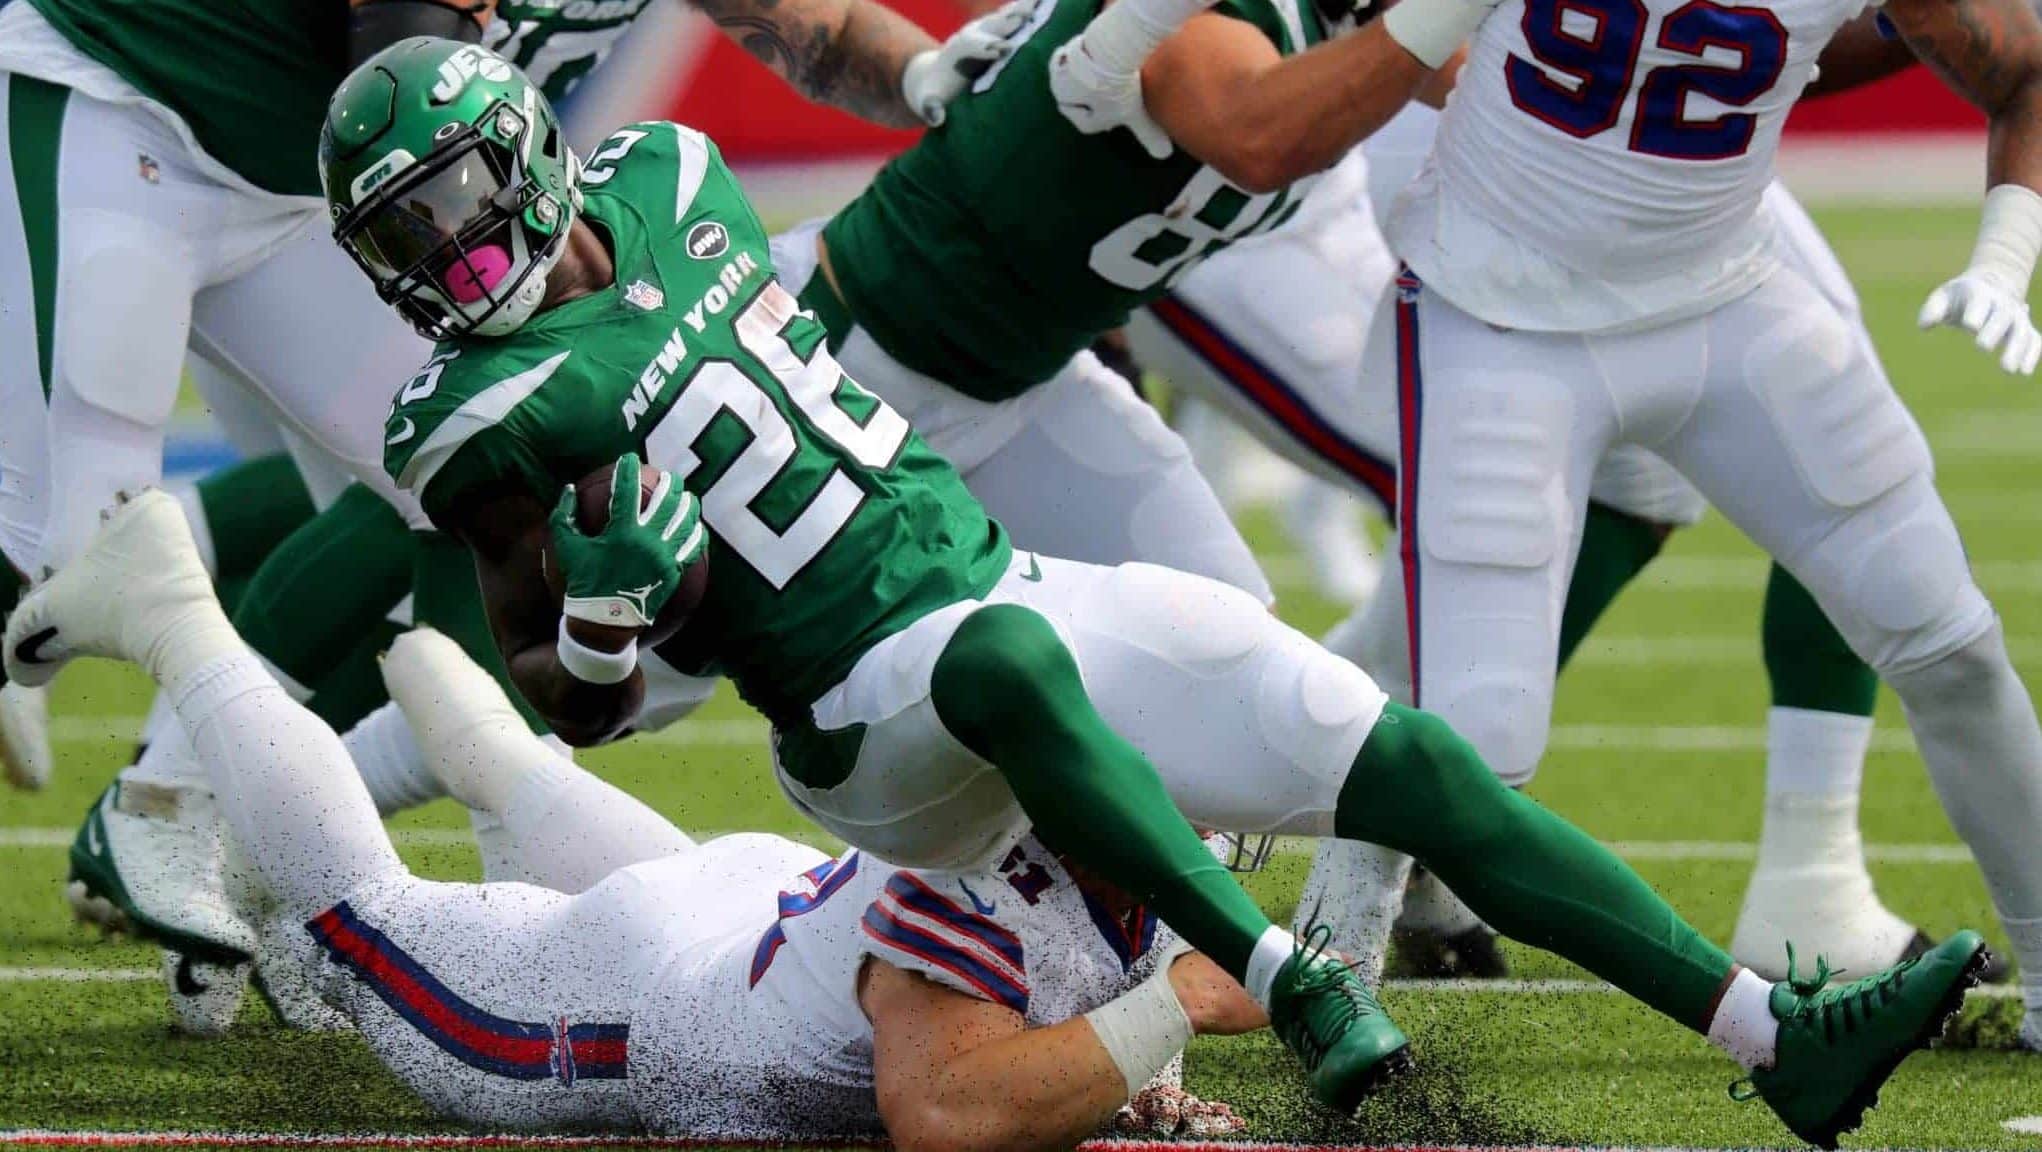 ORCHARD PARK, NY - SEPTEMBER 13: Justin Zimmer #61 of the Buffalo Bills dives to make a tackle on Le'Veon Bell #26 of the New York Jets during the first quarter at Bills Stadium on September 13, 2020 in Orchard Park, New York.